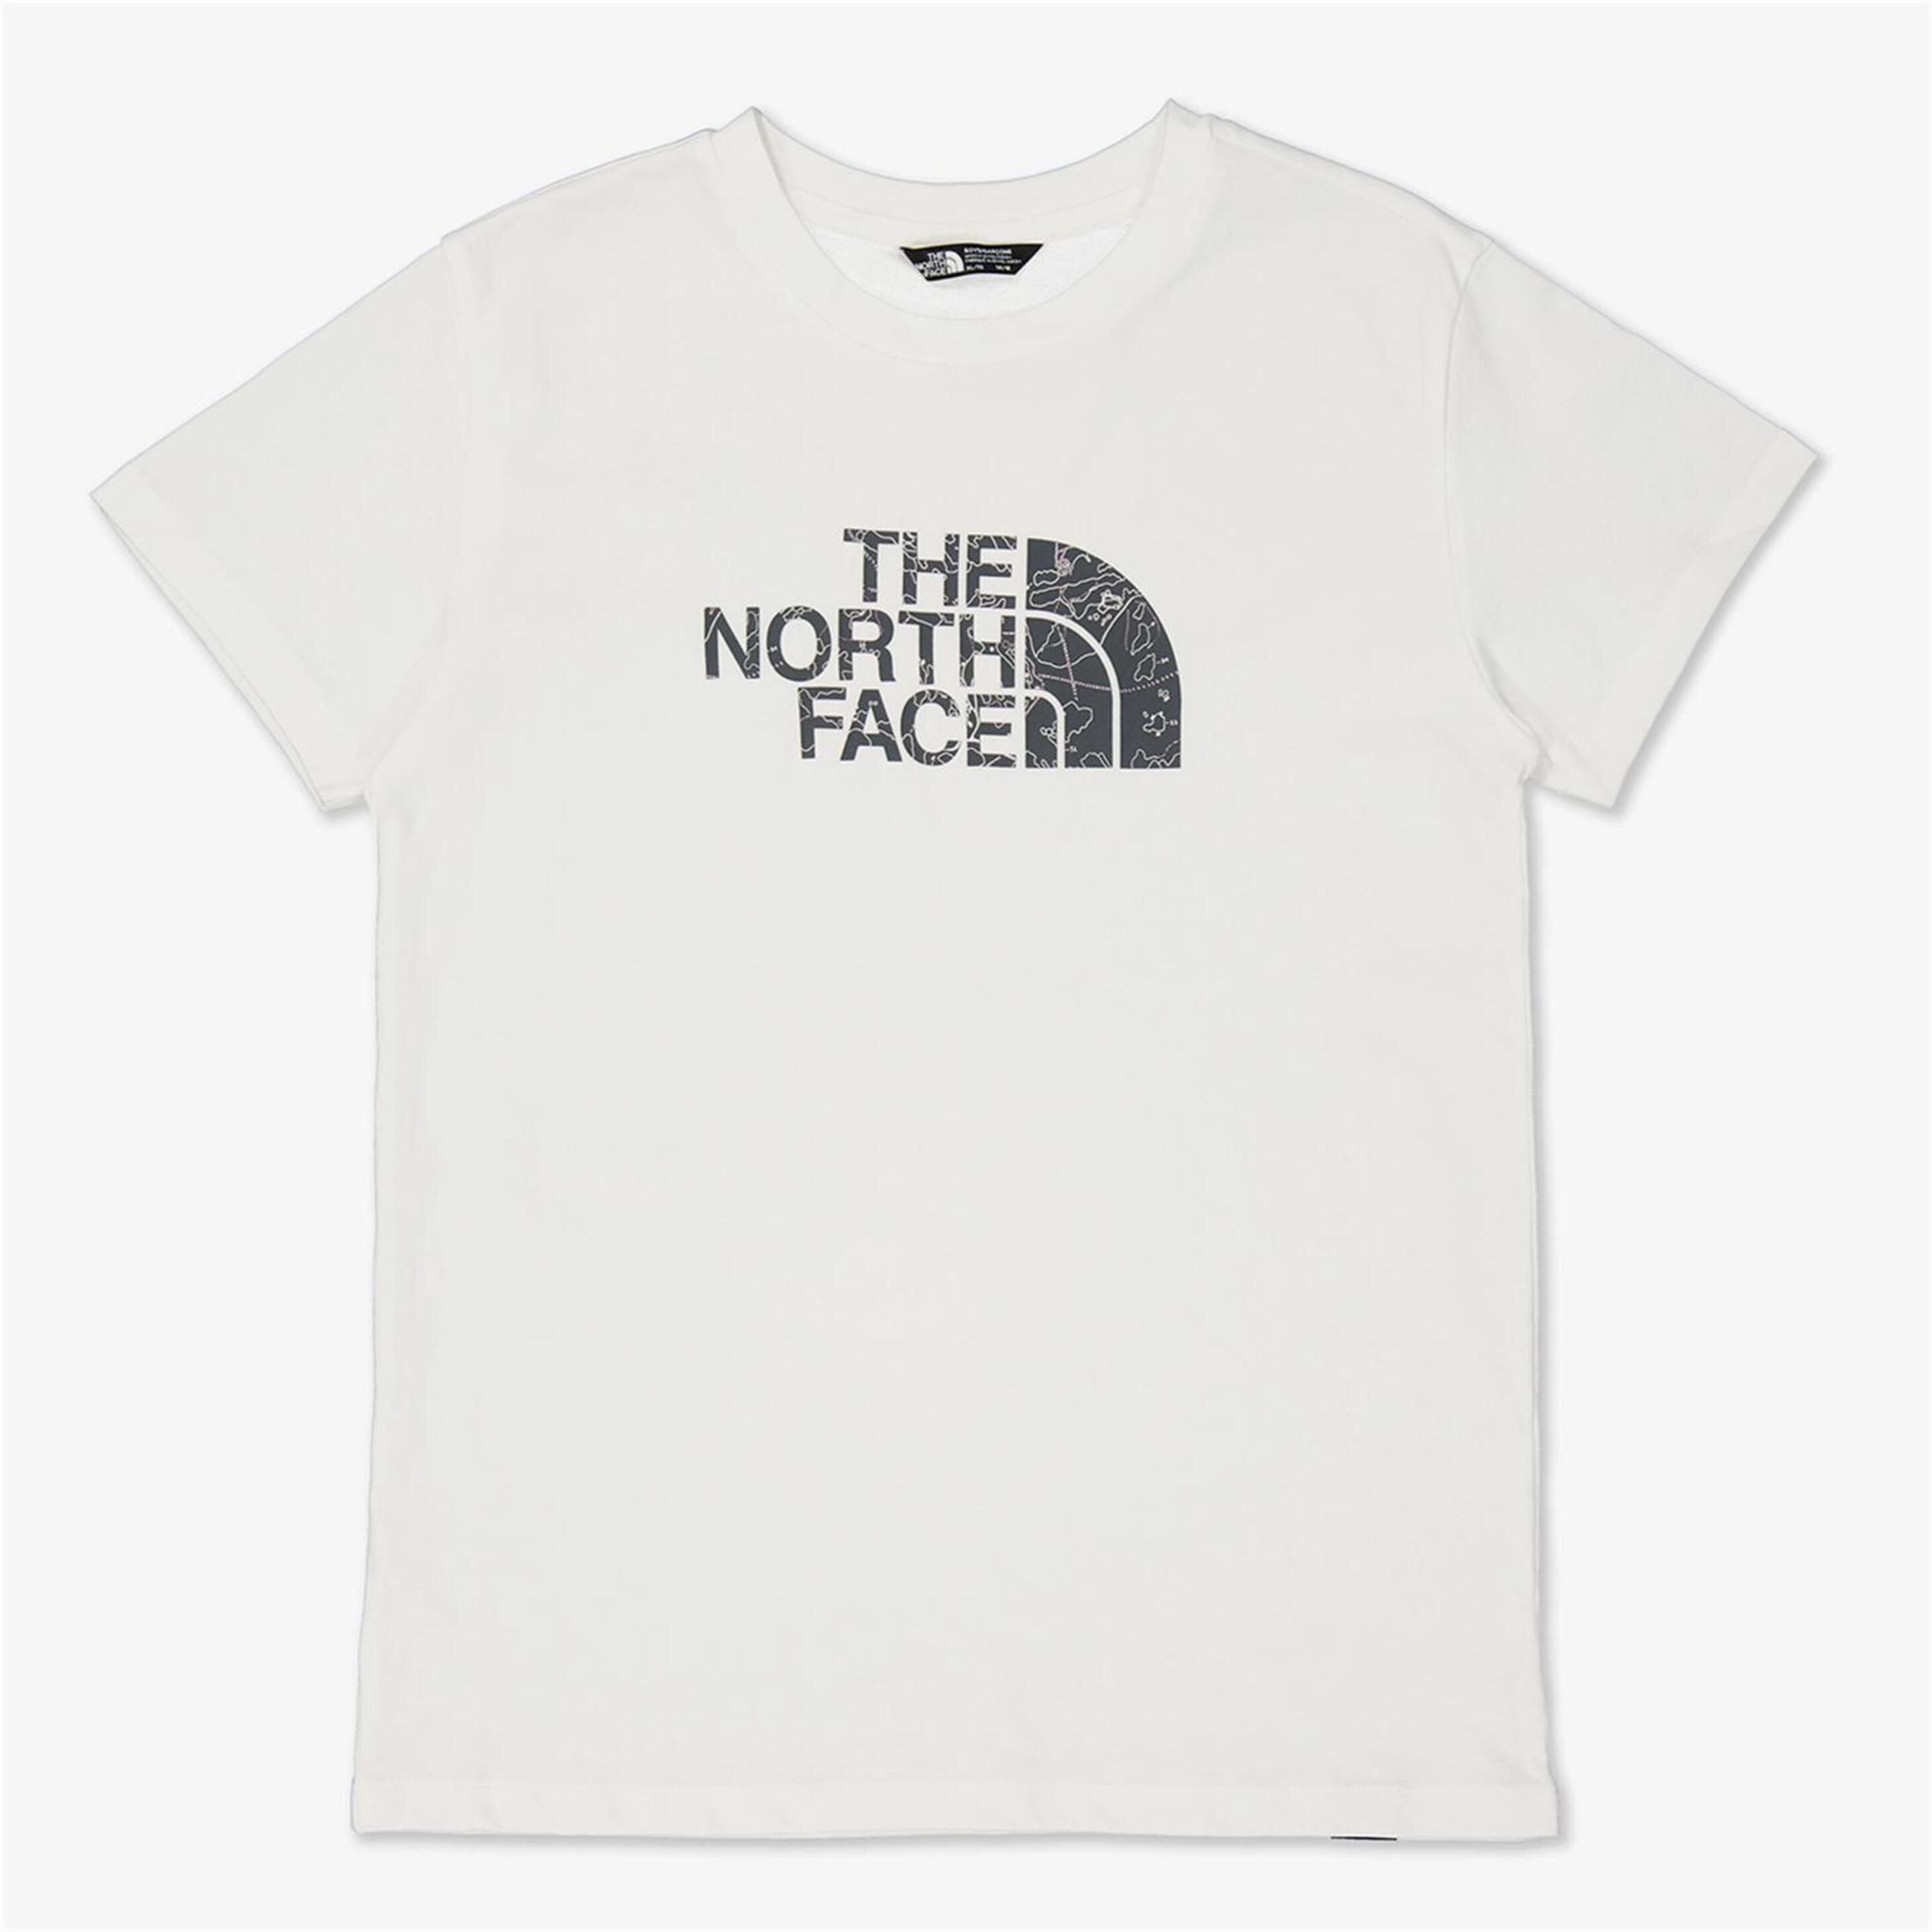 The North Face Easy - blanco - T-shirt Trekking Rapaz